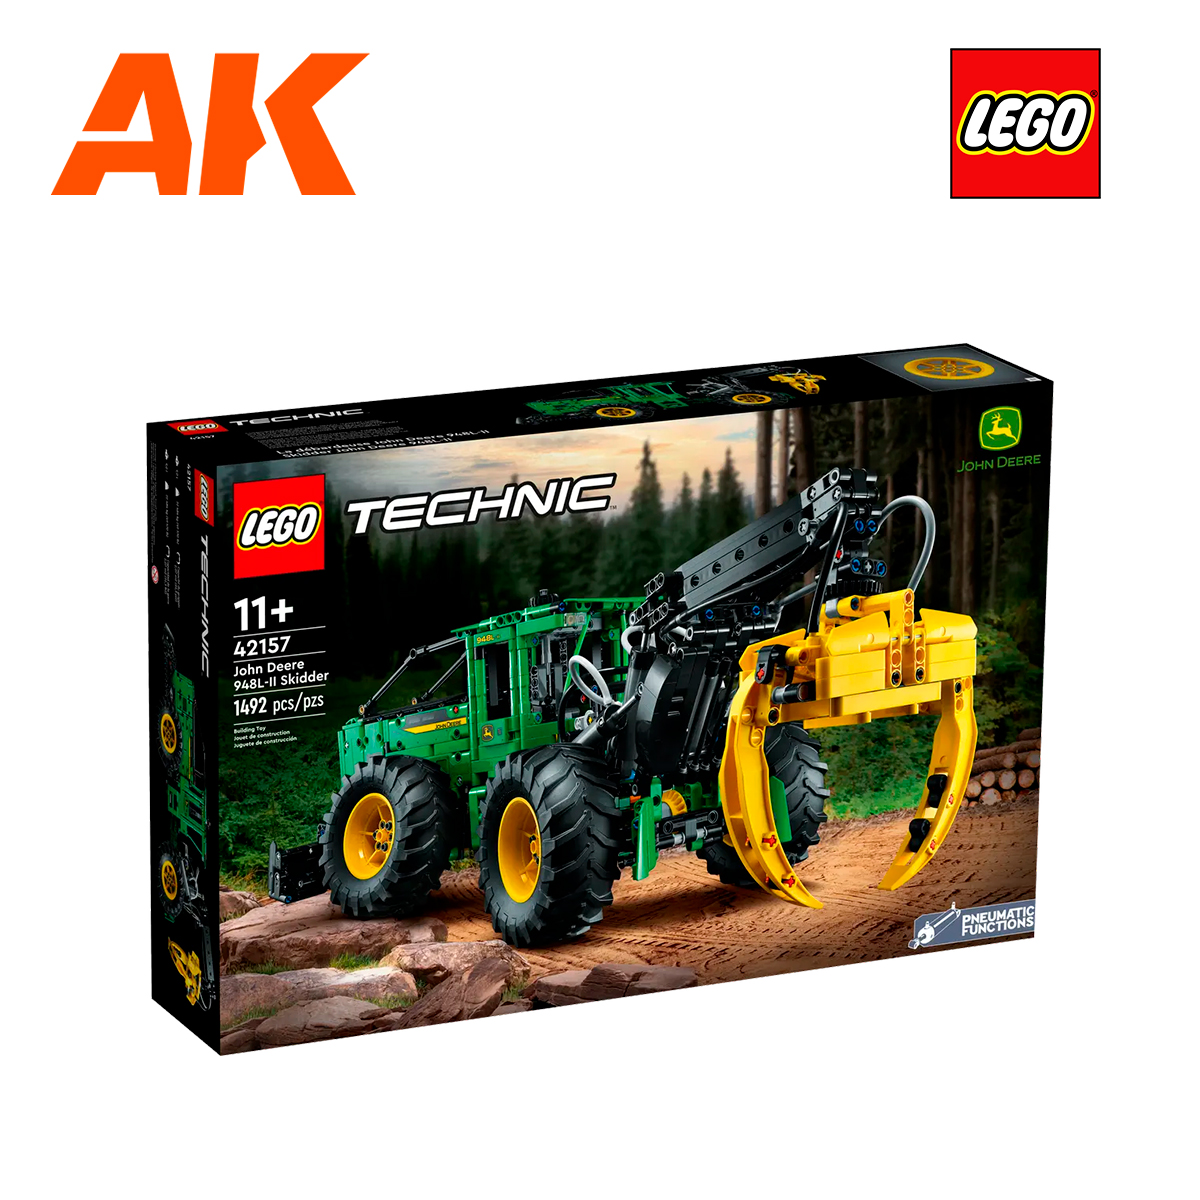 Free LEGO Tractor Mini Model Build at LEGO stores on May 1 & 2